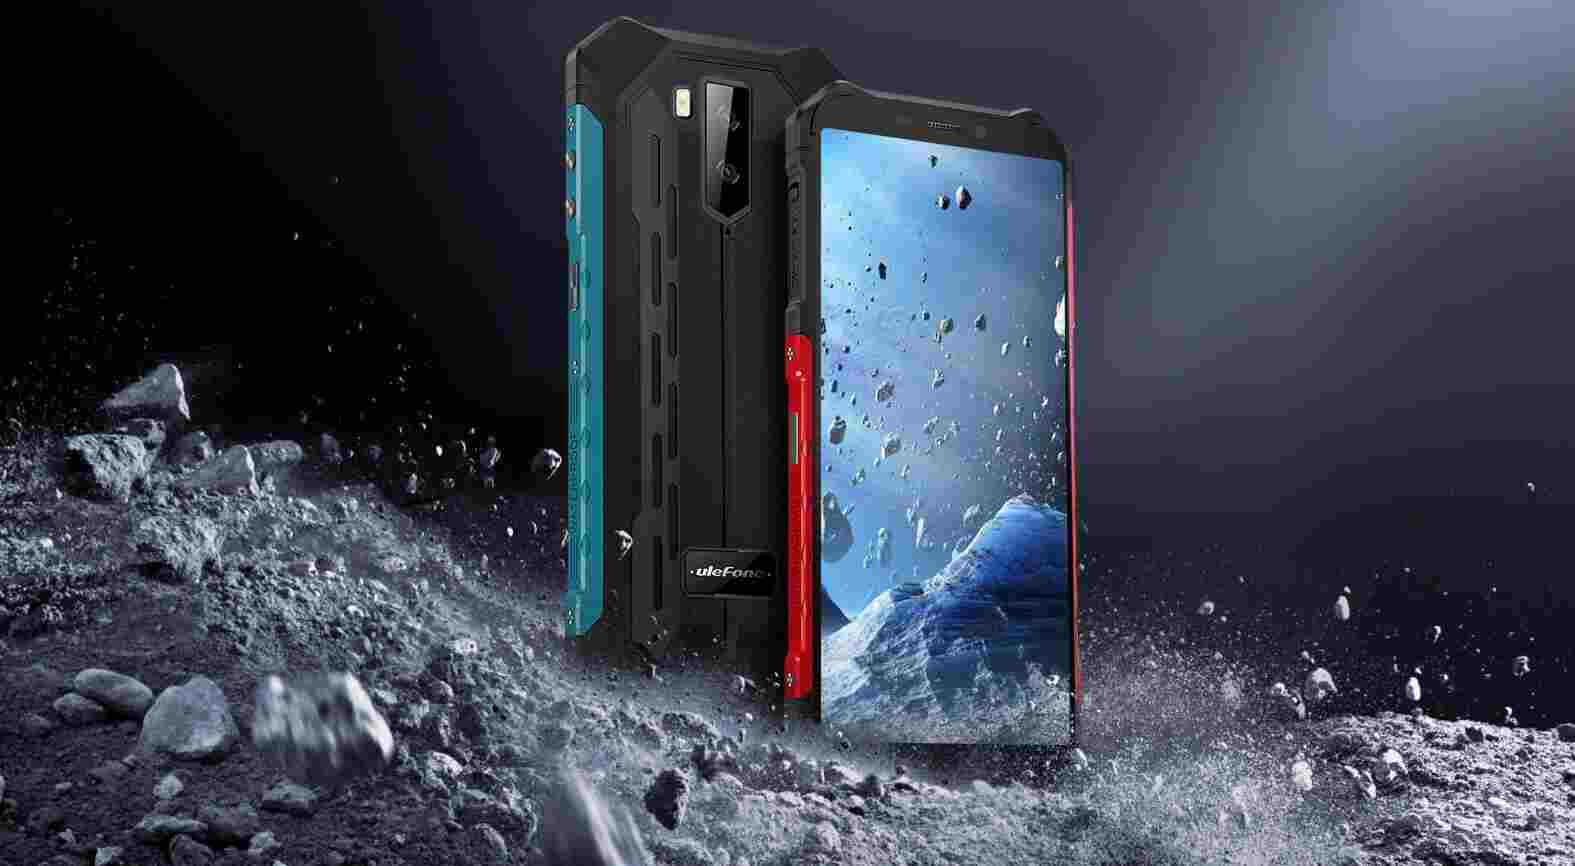 Ulefone Armor X9 with MIL-STD-810G protection, 5000mah battery launched